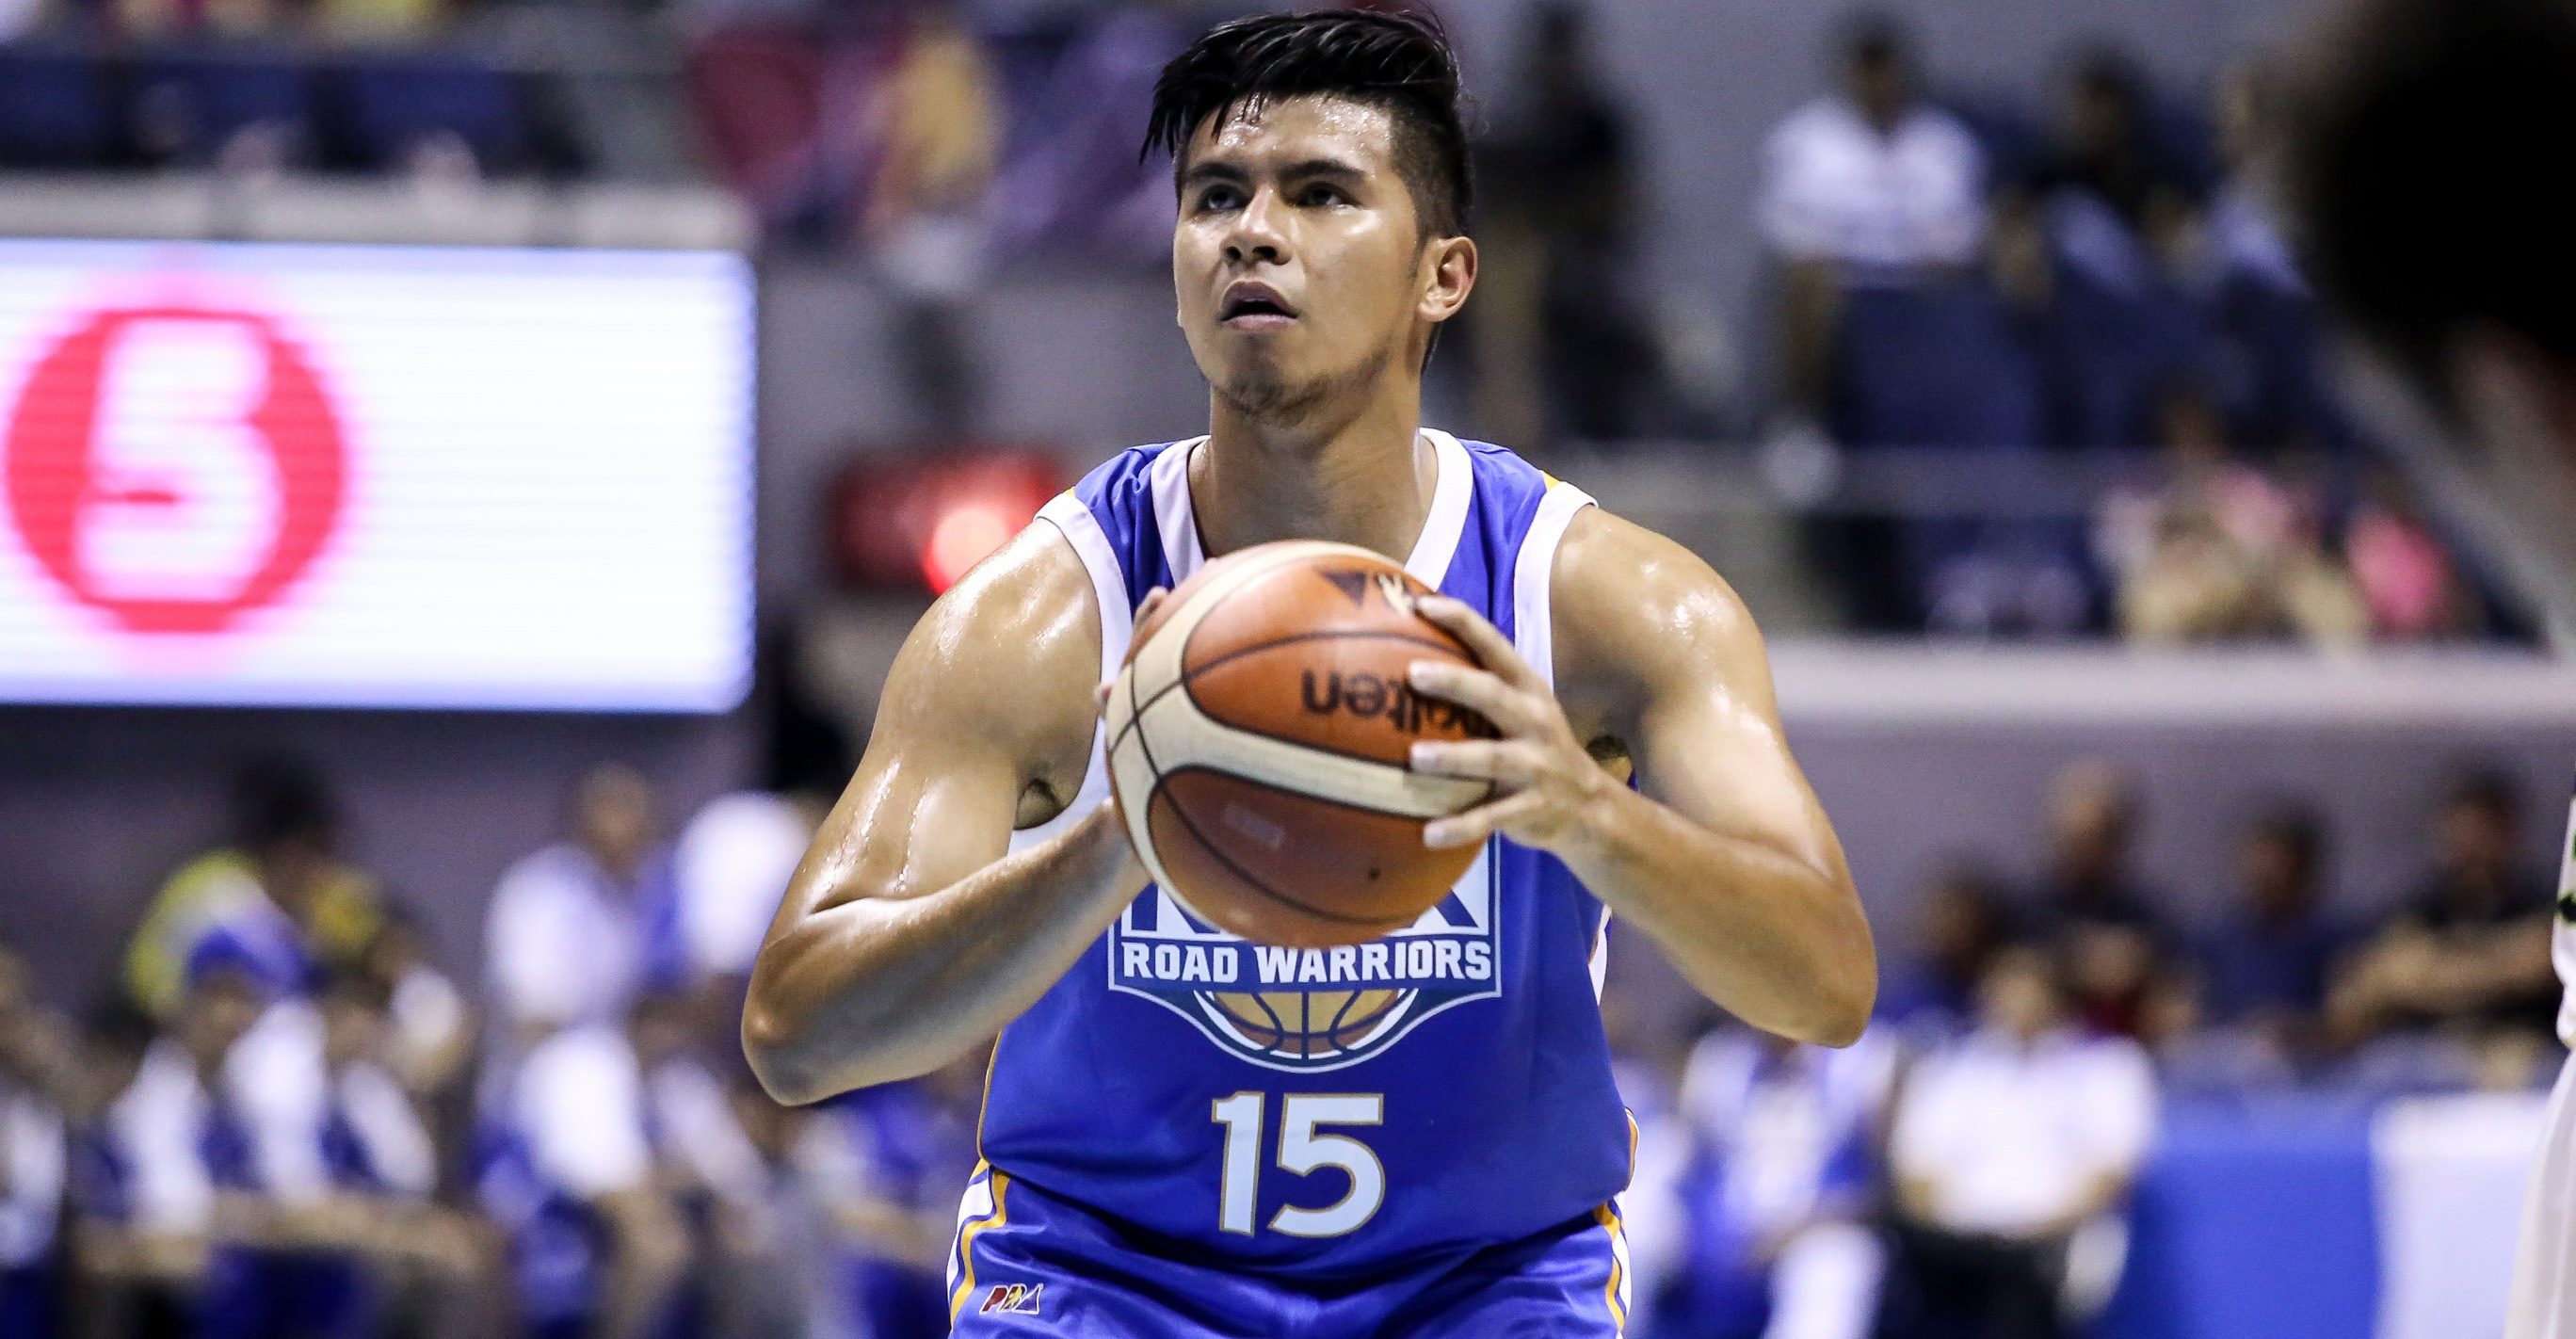 PBA: Kiefer Ravena still awaiting clearance to return to NLEX for one conference